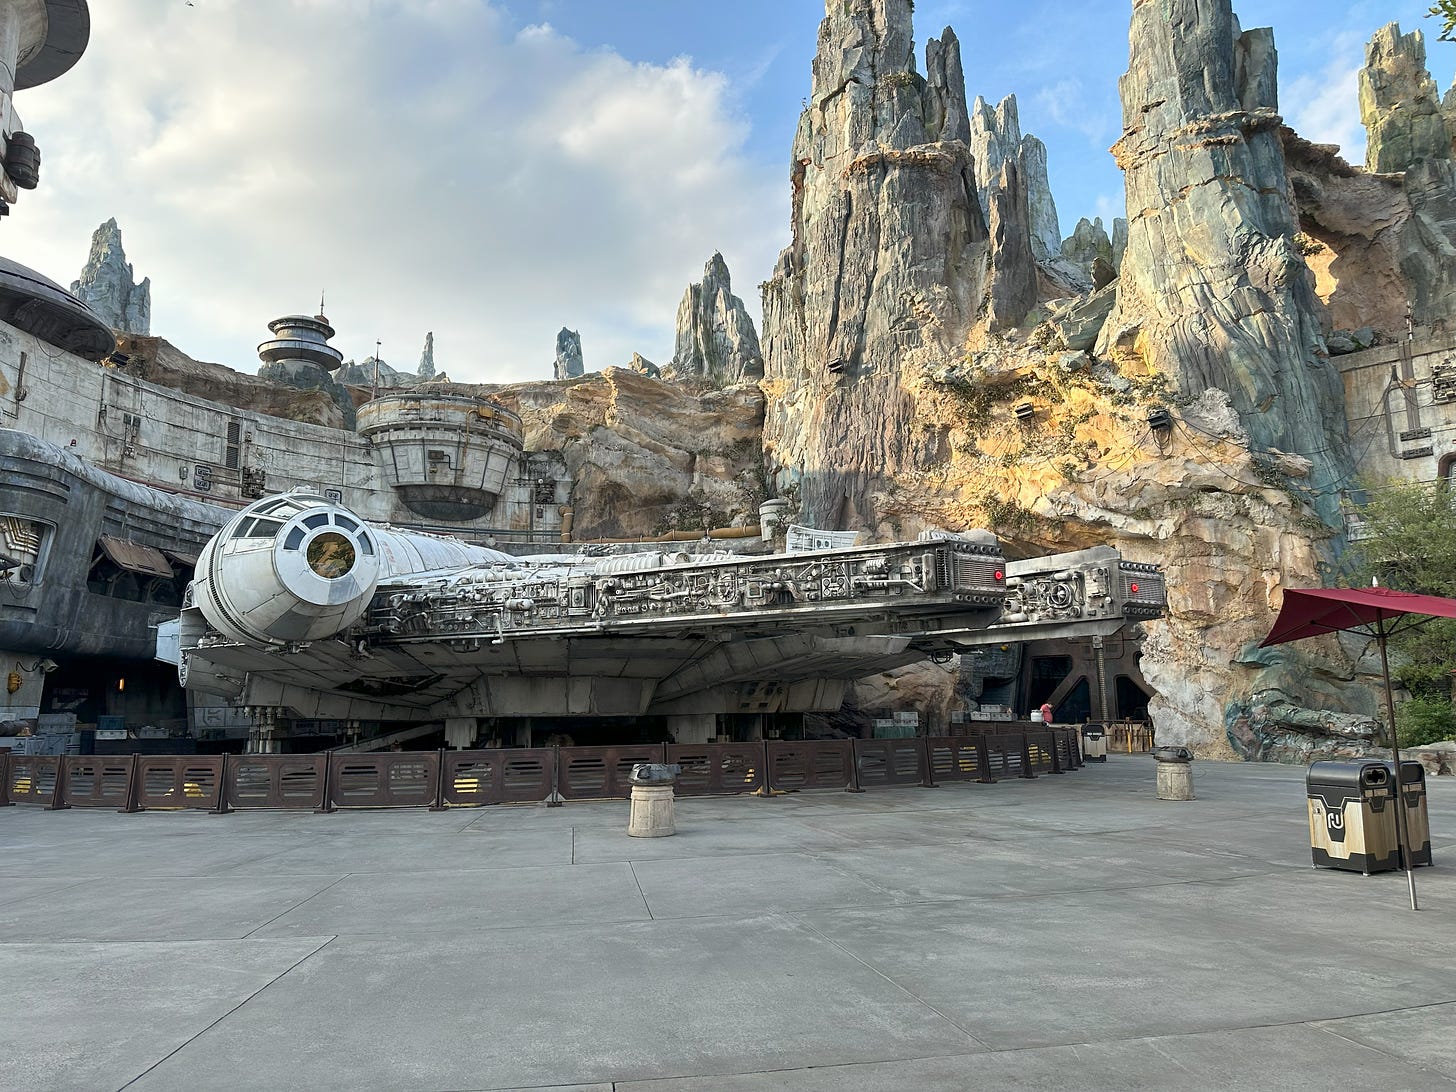 The Millennium Falcon at Docking Bay 5 in Black Spire Outpost, Batuu